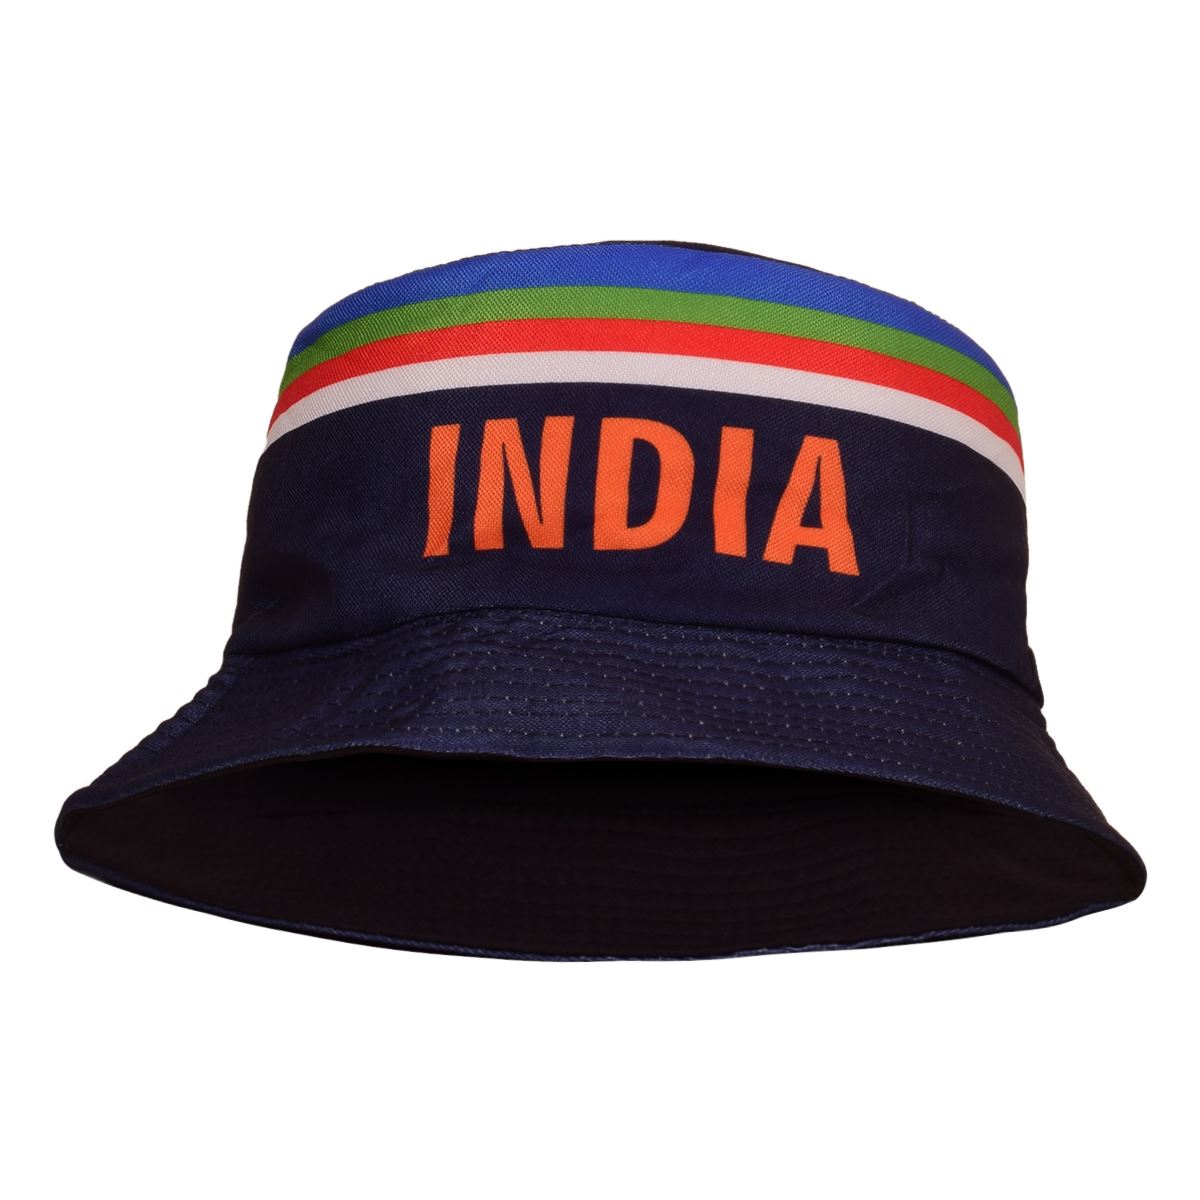 India Cricket Bucket Sun Hat| UV Protection| Bharat Army| Reversible | Ideal for Cricket Enthusiasts| Outdoor Headwear |Fisherman Hat| Beach Hat| Shade Hat| Mens Womens